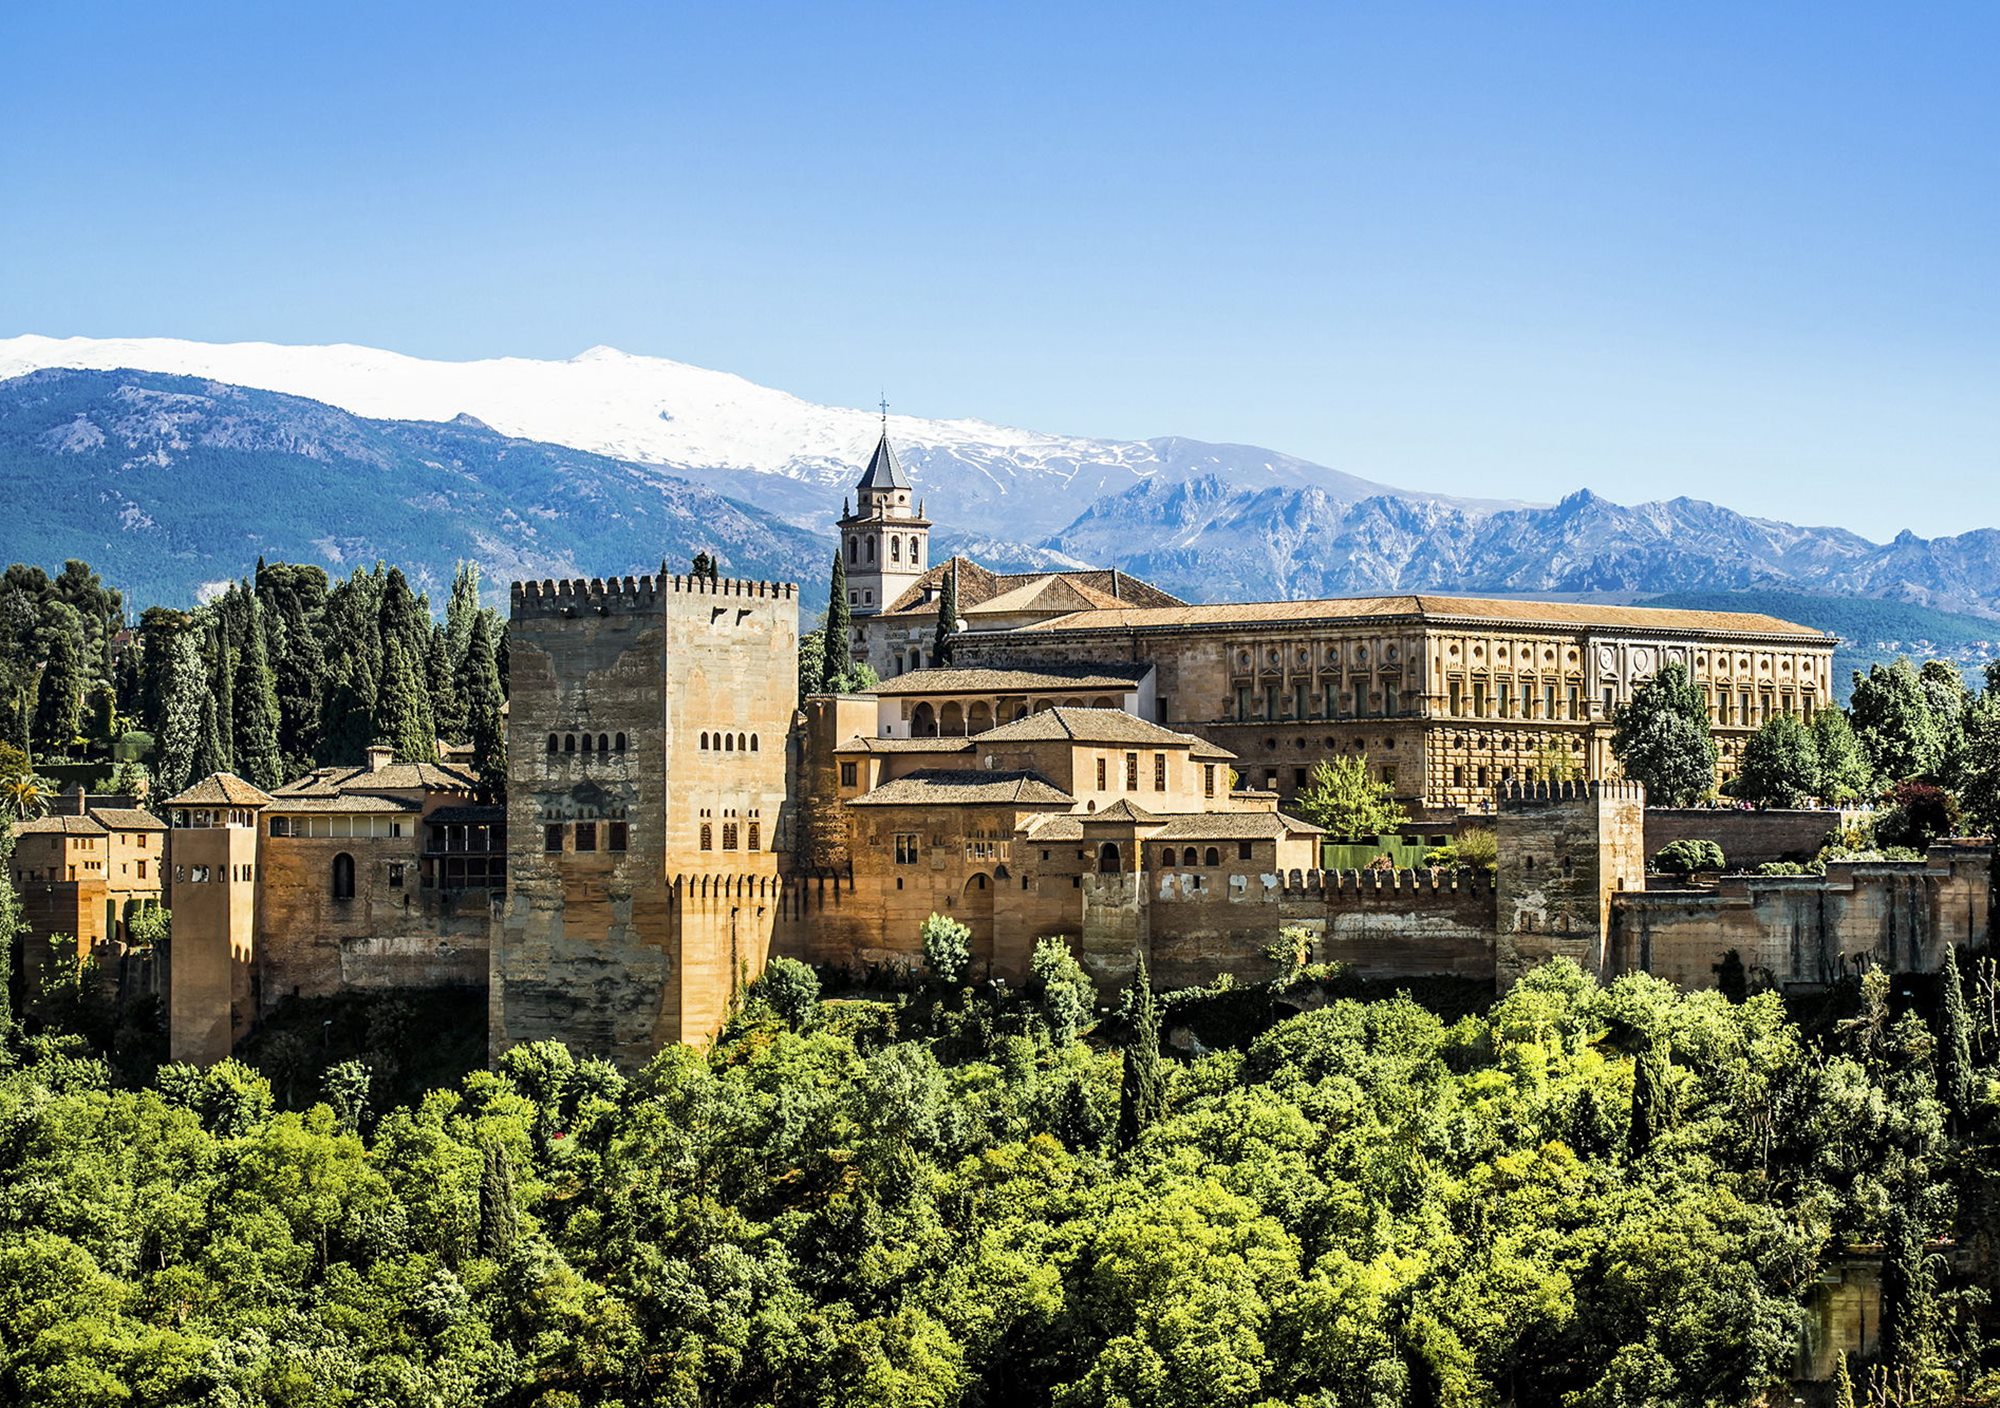 guided tour visit Alhambra and Granada with transfer transport from Costa del Sol included nasrid palaces